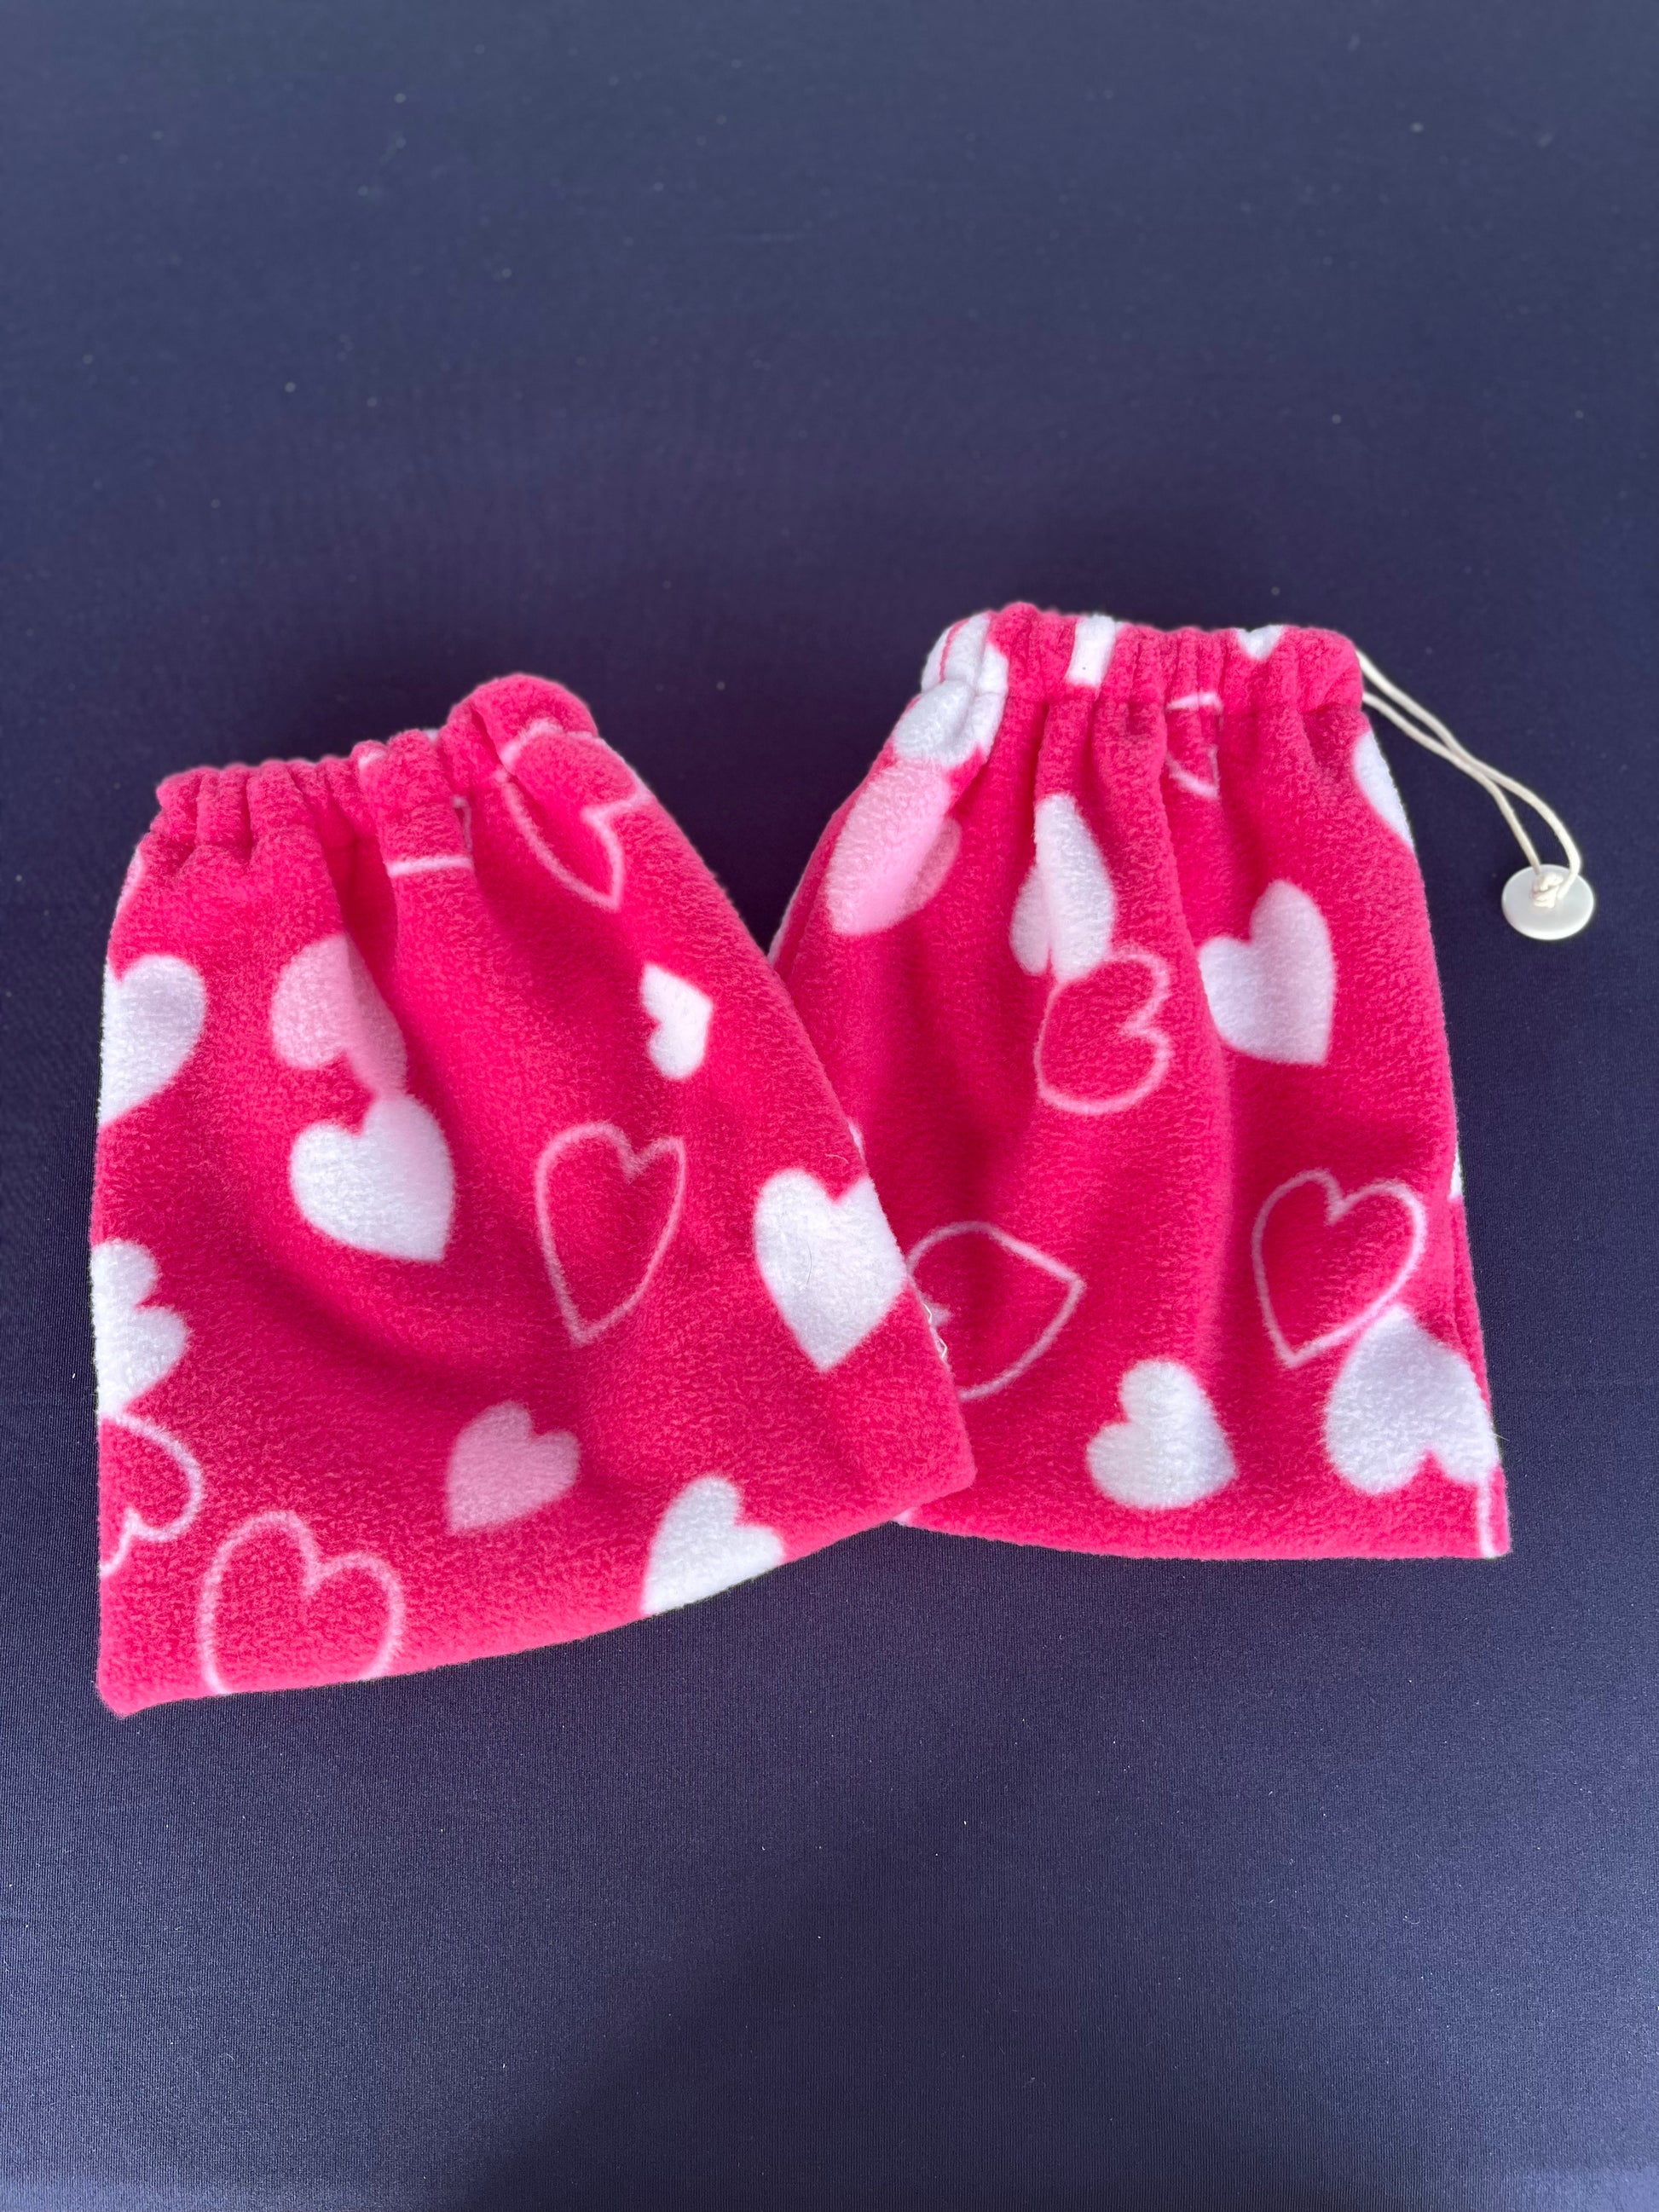 pink stirrup covers with various styles of hearts on them